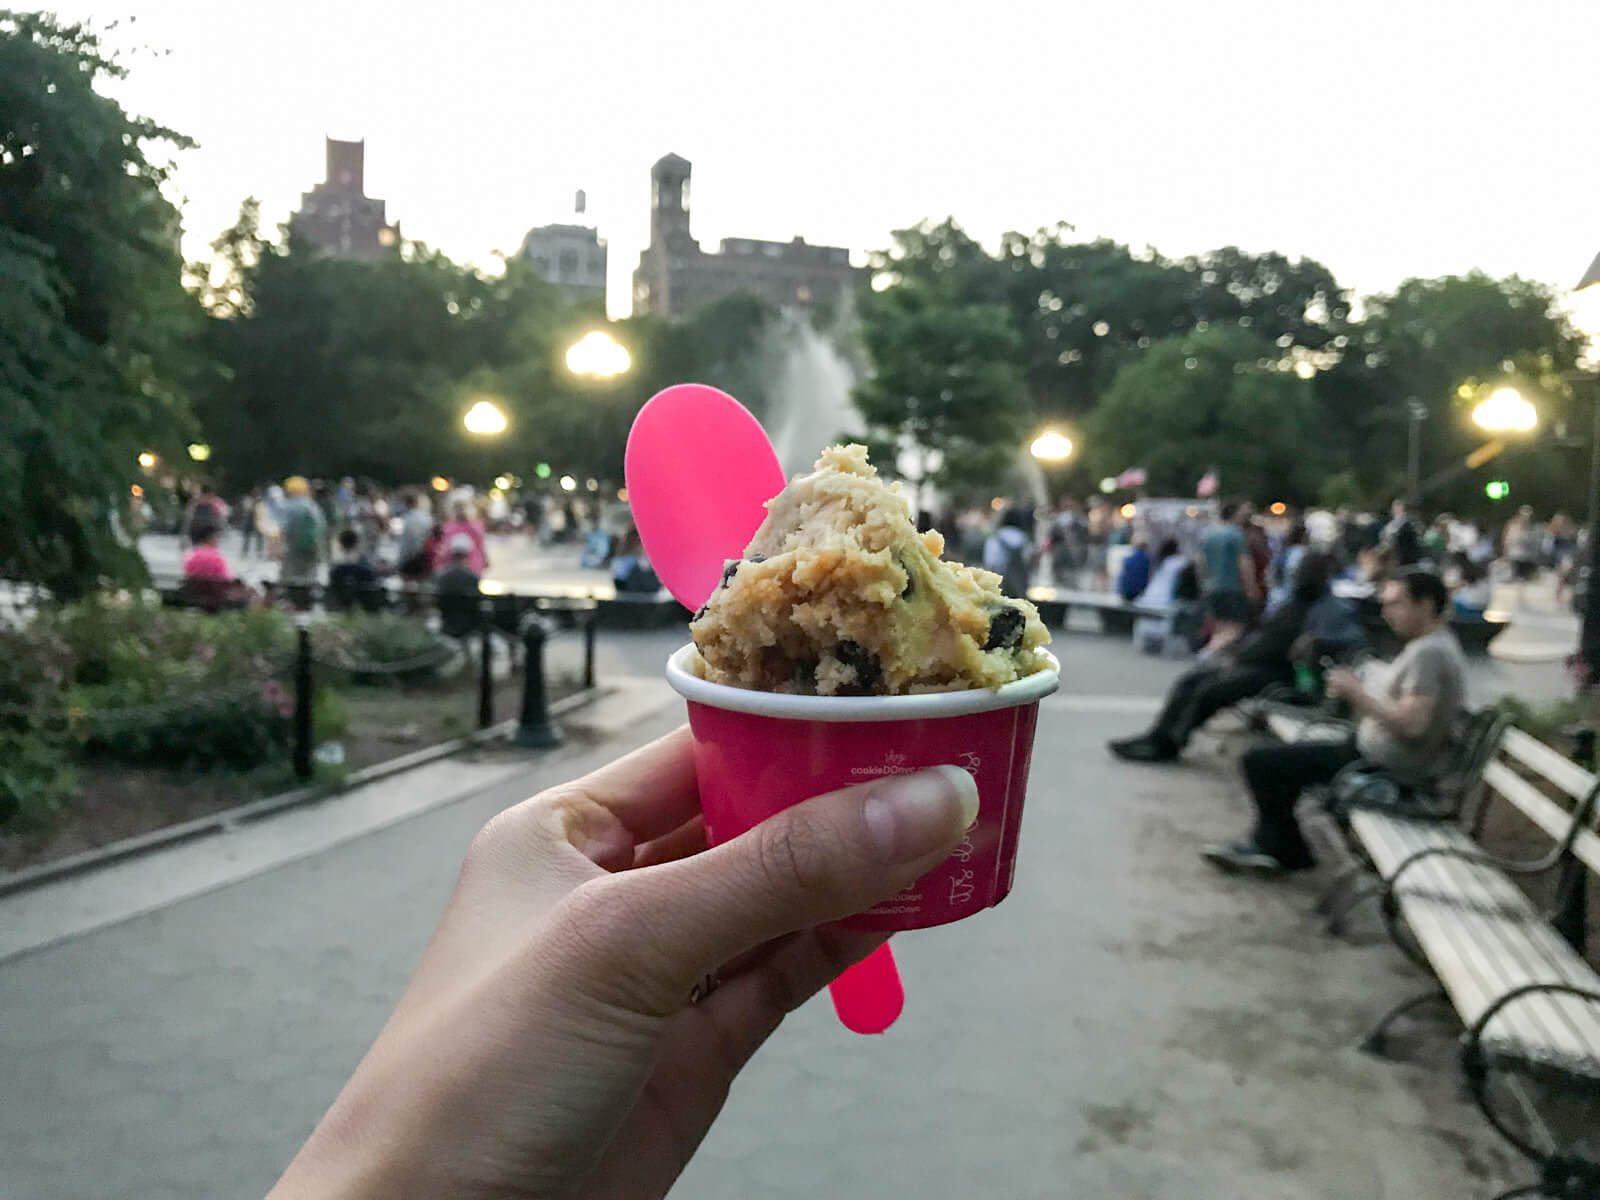 A person’s left hand holding a small pink cup and pink spoon with a cookie dough dessert inside the cup. In the background is a busy park with a water fountain